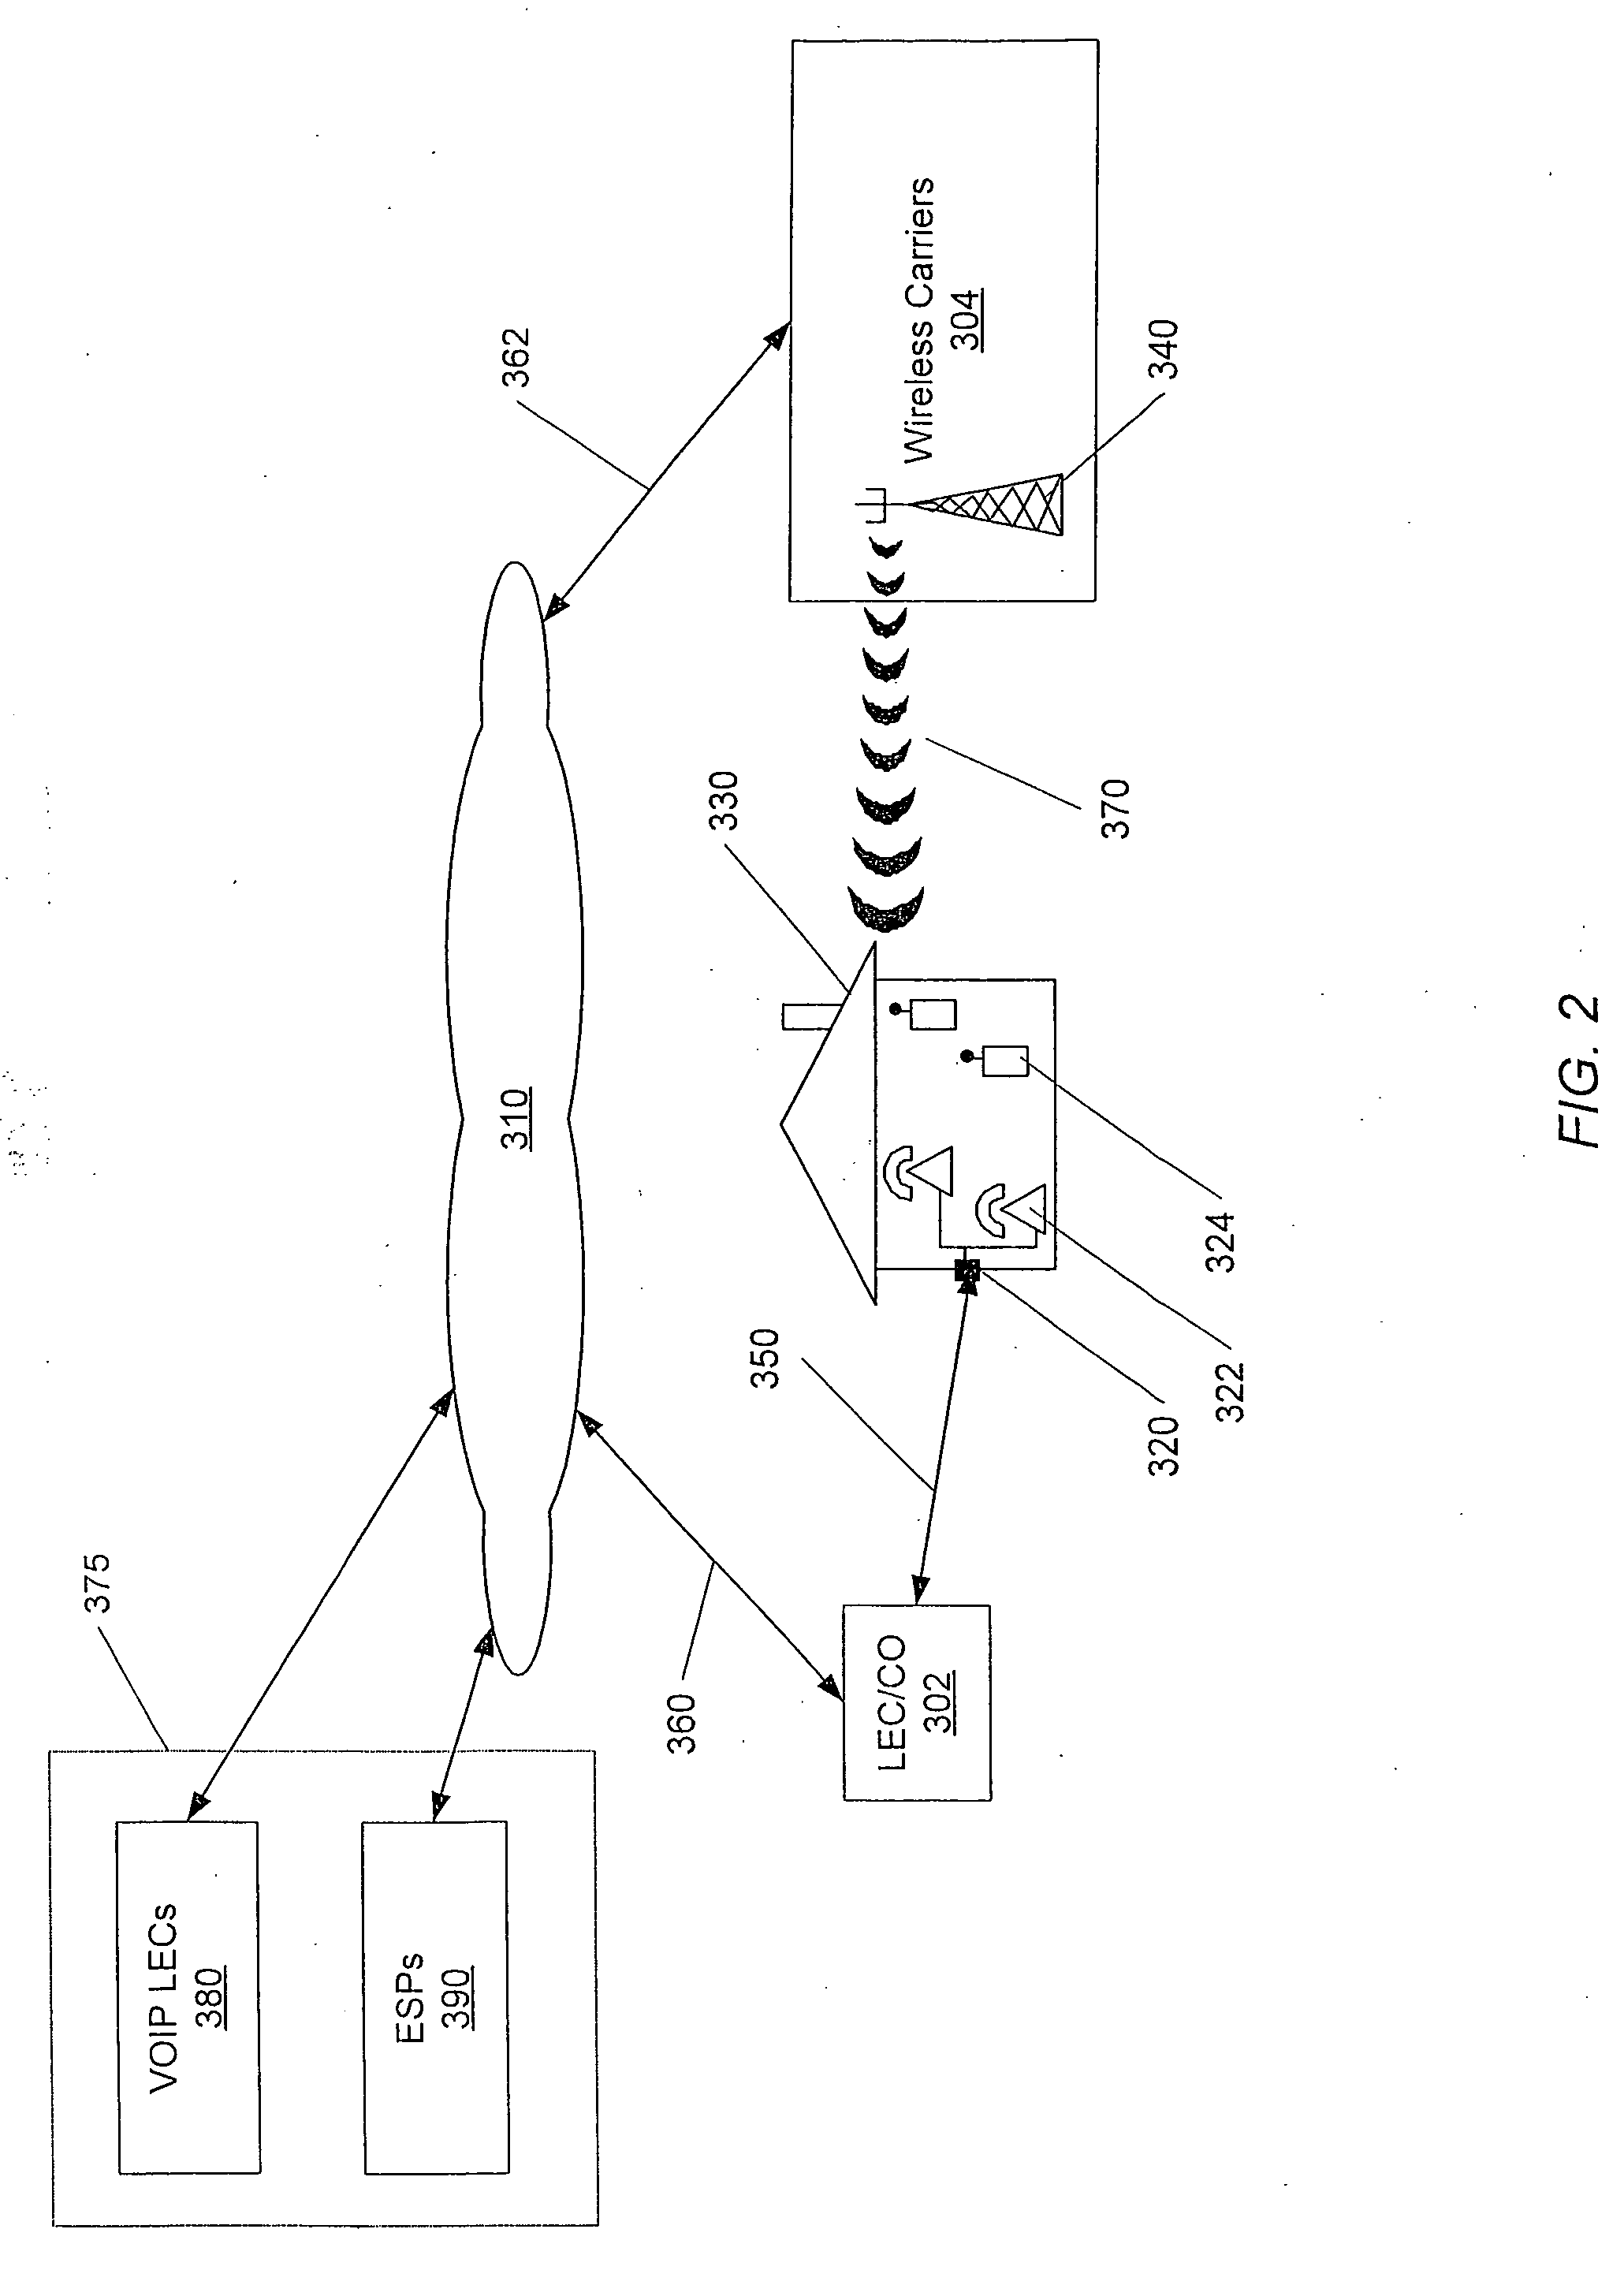 System and method for managing telecommunications